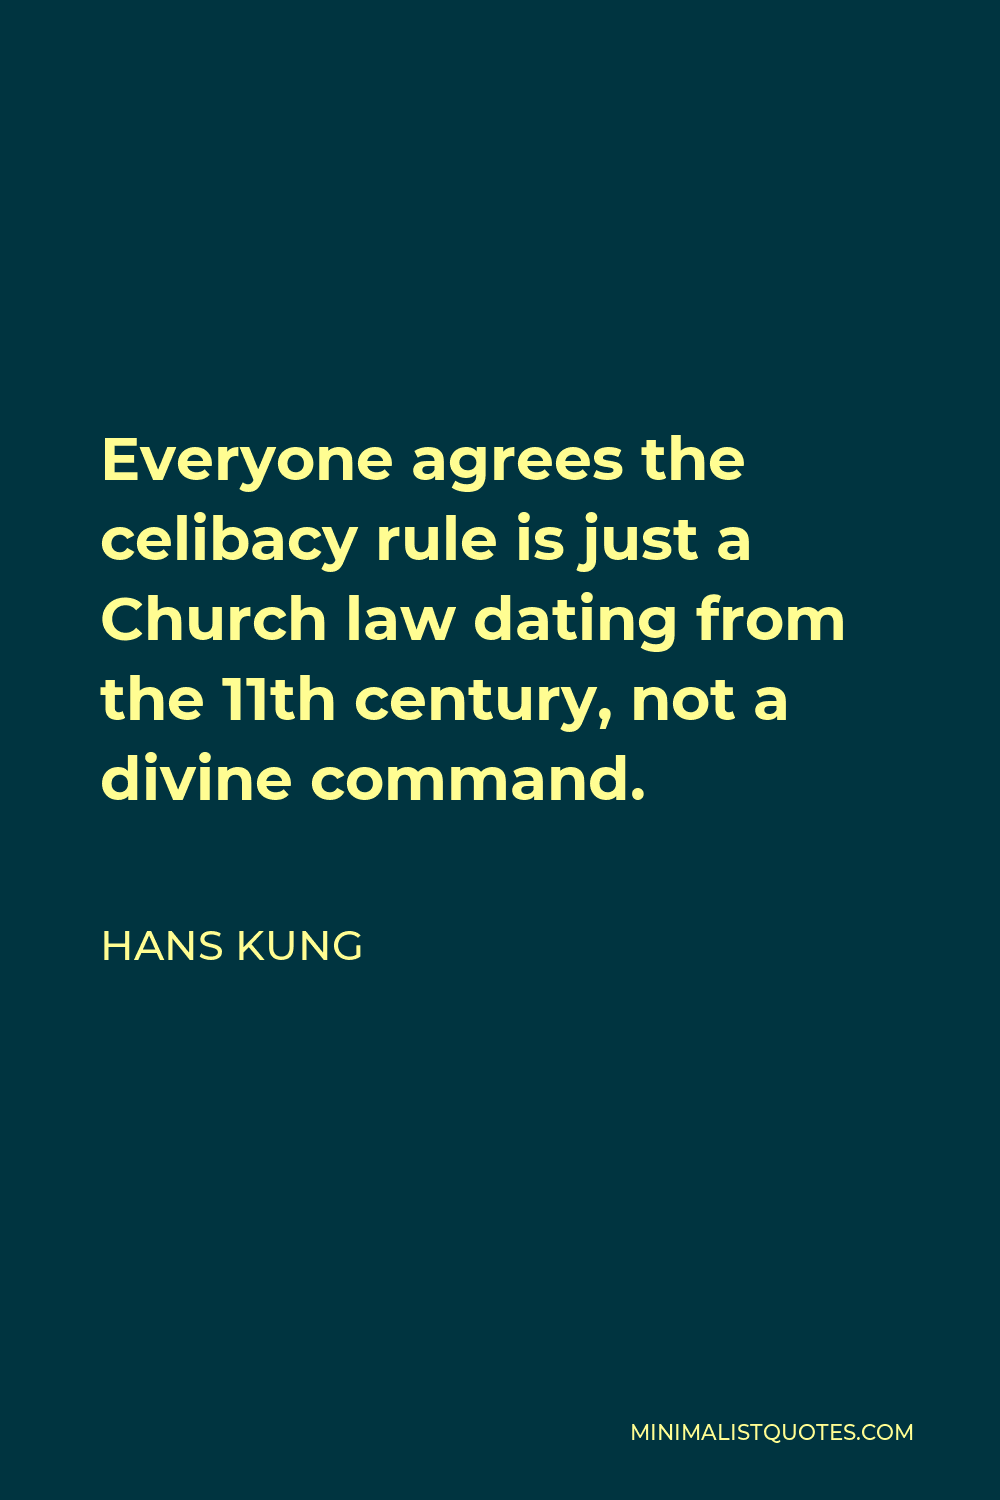 Hans Kung Quote - Everyone agrees the celibacy rule is just a Church law dating from the 11th century, not a divine command.